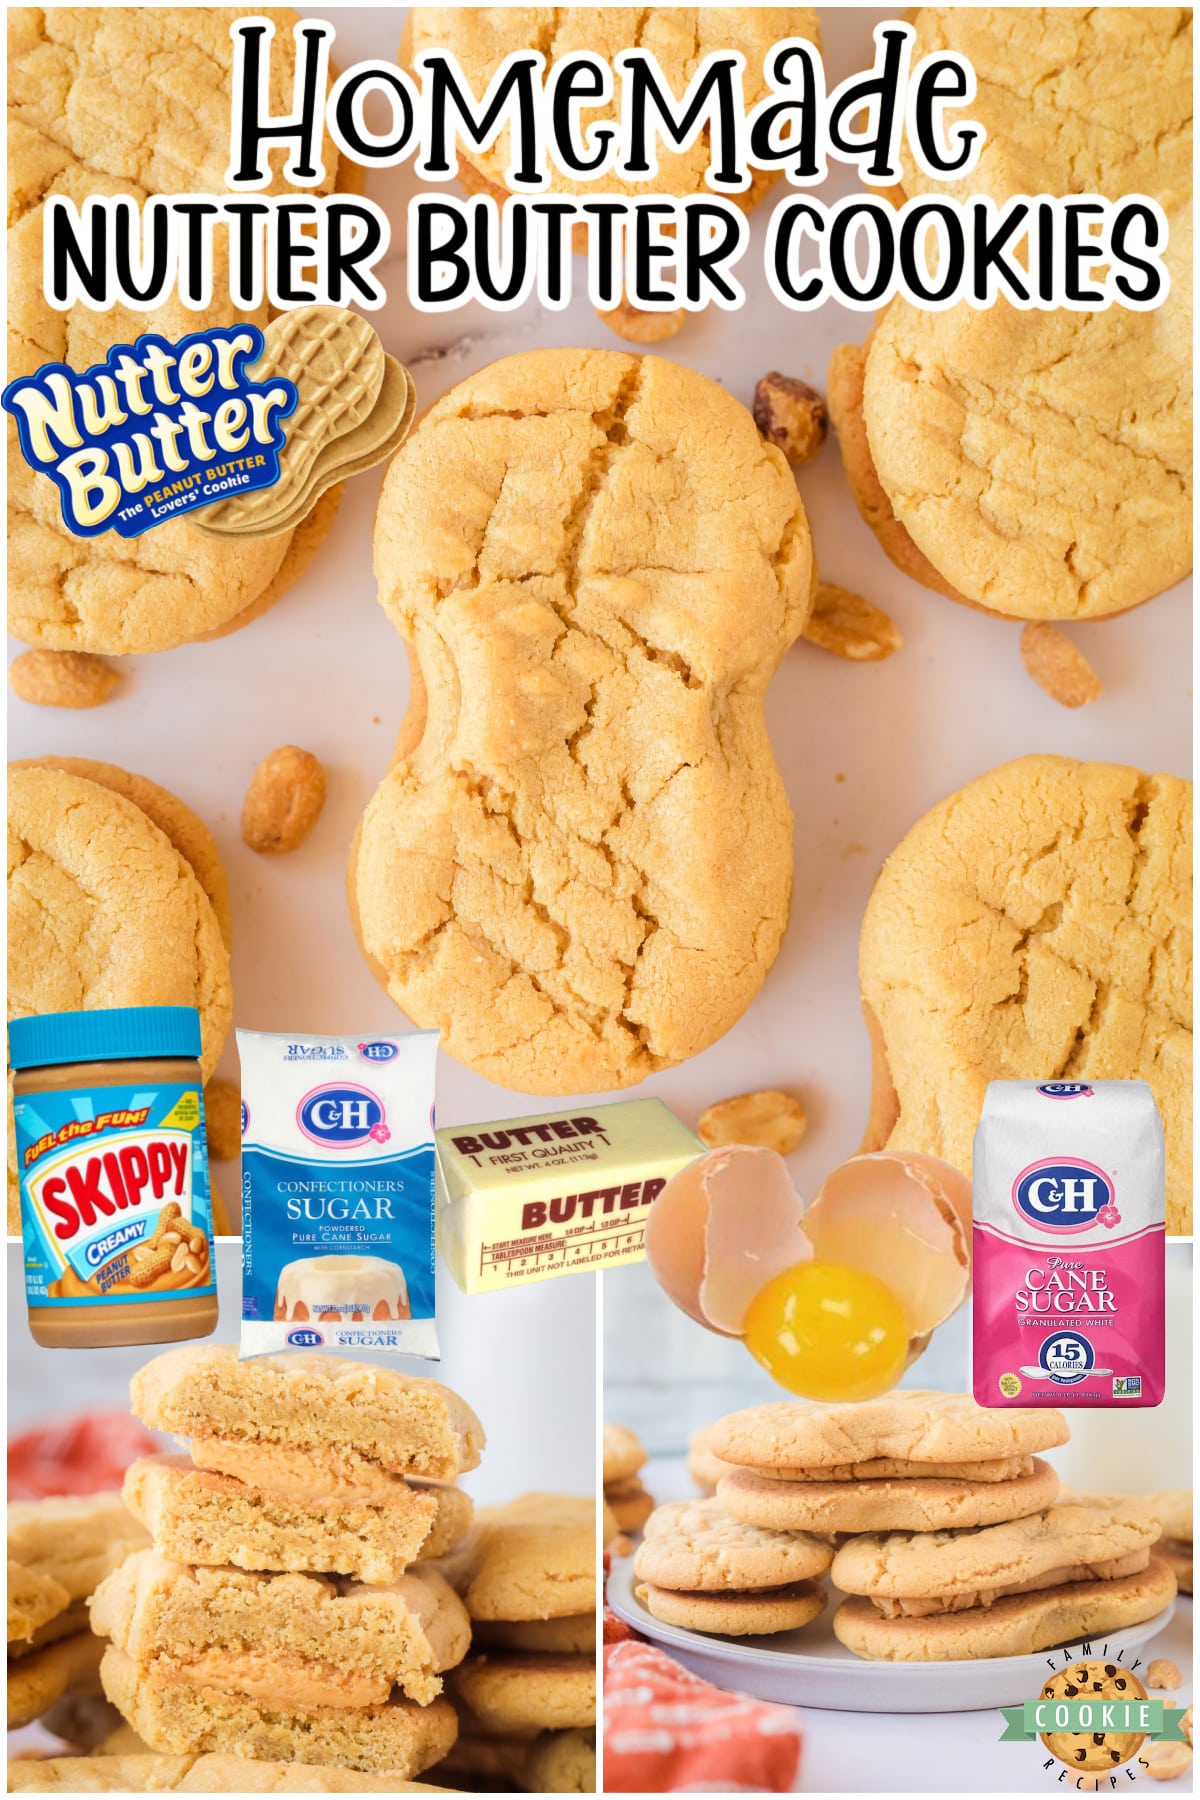 Homemade Nutter Butters are soft, chewy cookies that are so much better than the store-bought! Sweet & packed with great flavor, these copycat peanut butter cookies are a hit! 